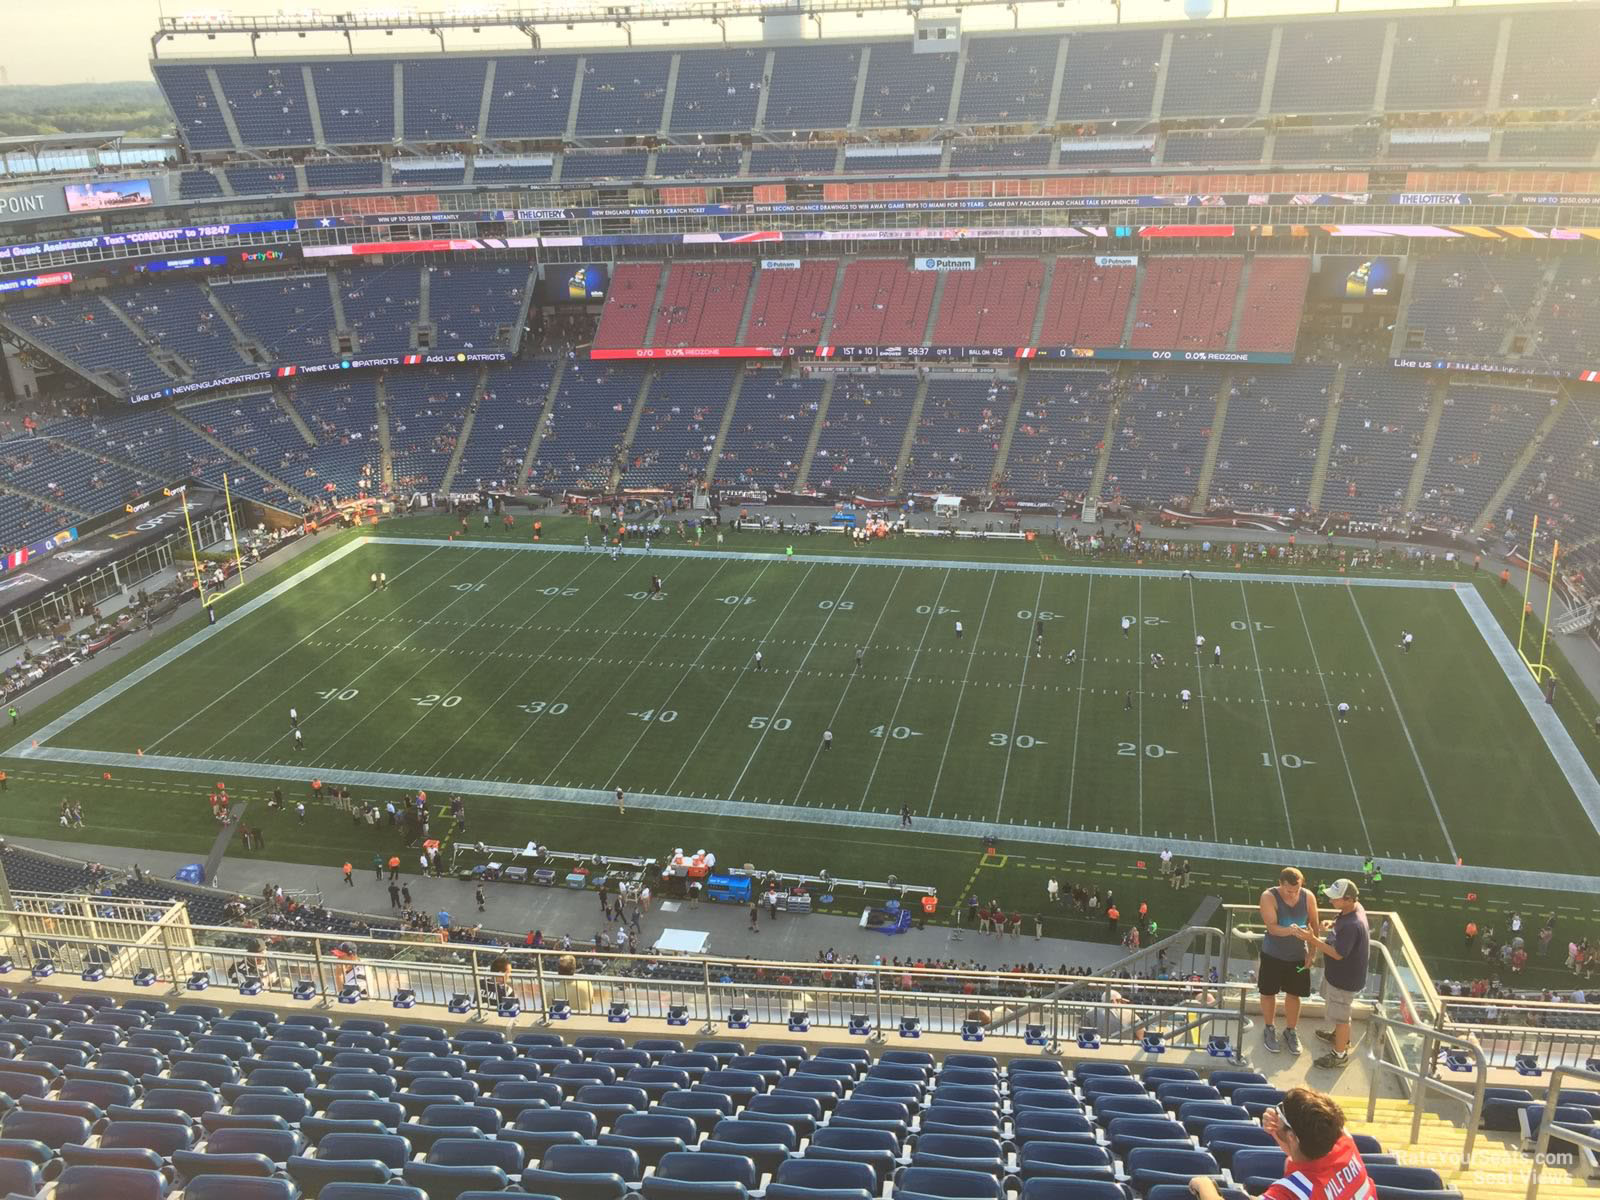 section 308, row 19 seat view  for football - gillette stadium